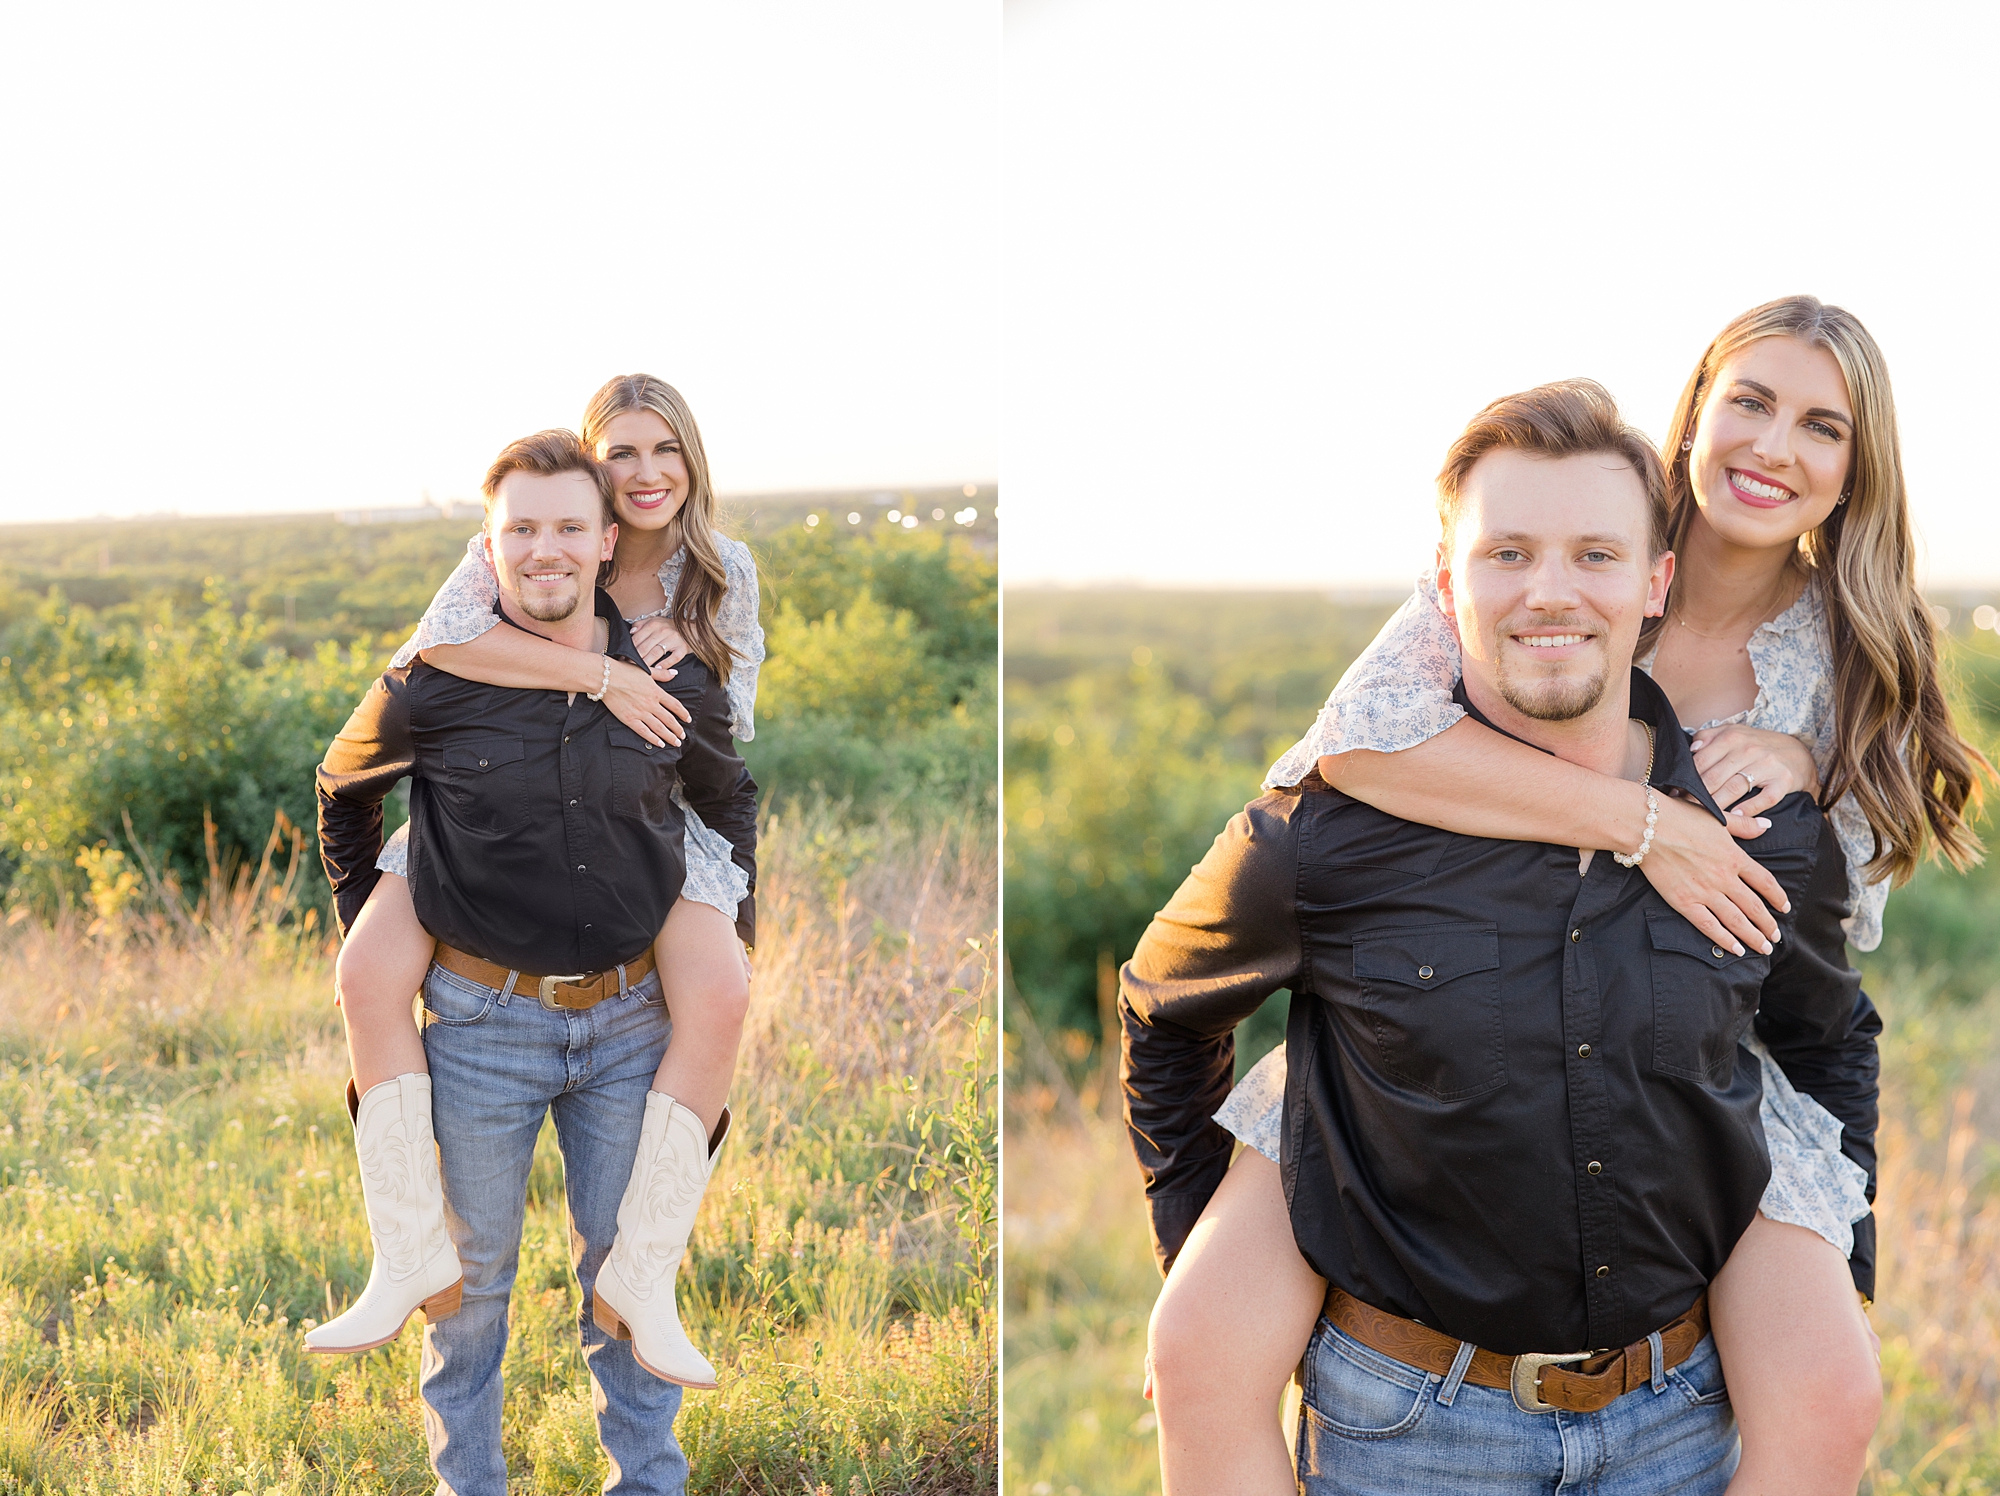 man gives fiancee a piggy back ride during sunset engagement photos